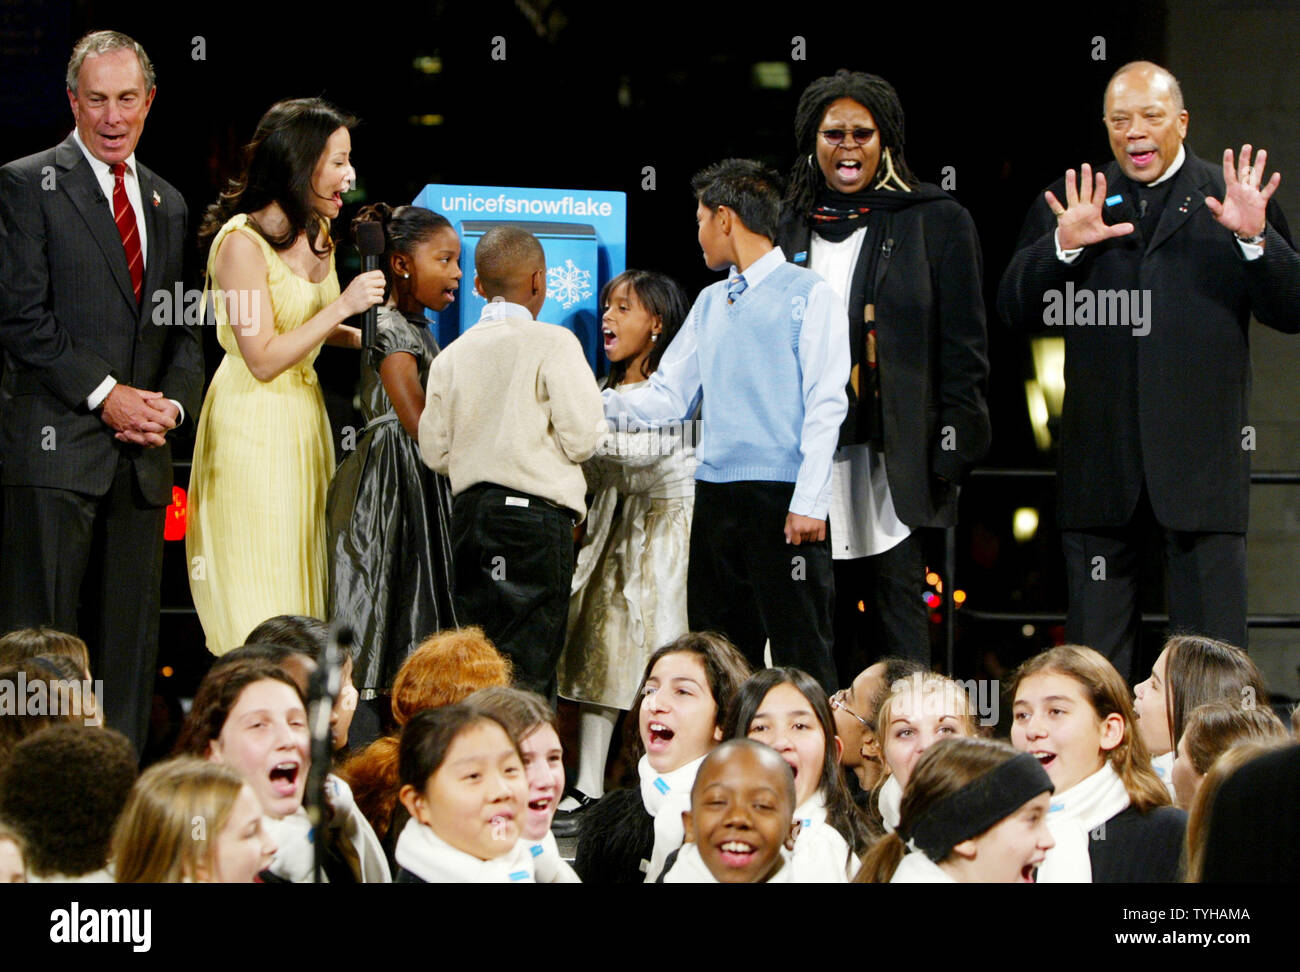 New York City mayor Michael Bloomberg, left, actor Lucy Liu, second left, comedien Whoppi Goldberg, second right, and music impresario Quincy Jones join children ,who are Hurricane Katrina and Asian tsunami survivors, on stage in a countdown for the lighing of the UNICEF crystal snowflake which hangs over Fifth Avenue on November 28, 2005 in New York City. This year's snowflake, which will be on display  through out the holiday season, is illuminated with 16,000 Baccarat crystal prisms and weighs more than 3,300 pounds. (UPI Photo/Monika Graff) Stock Photo